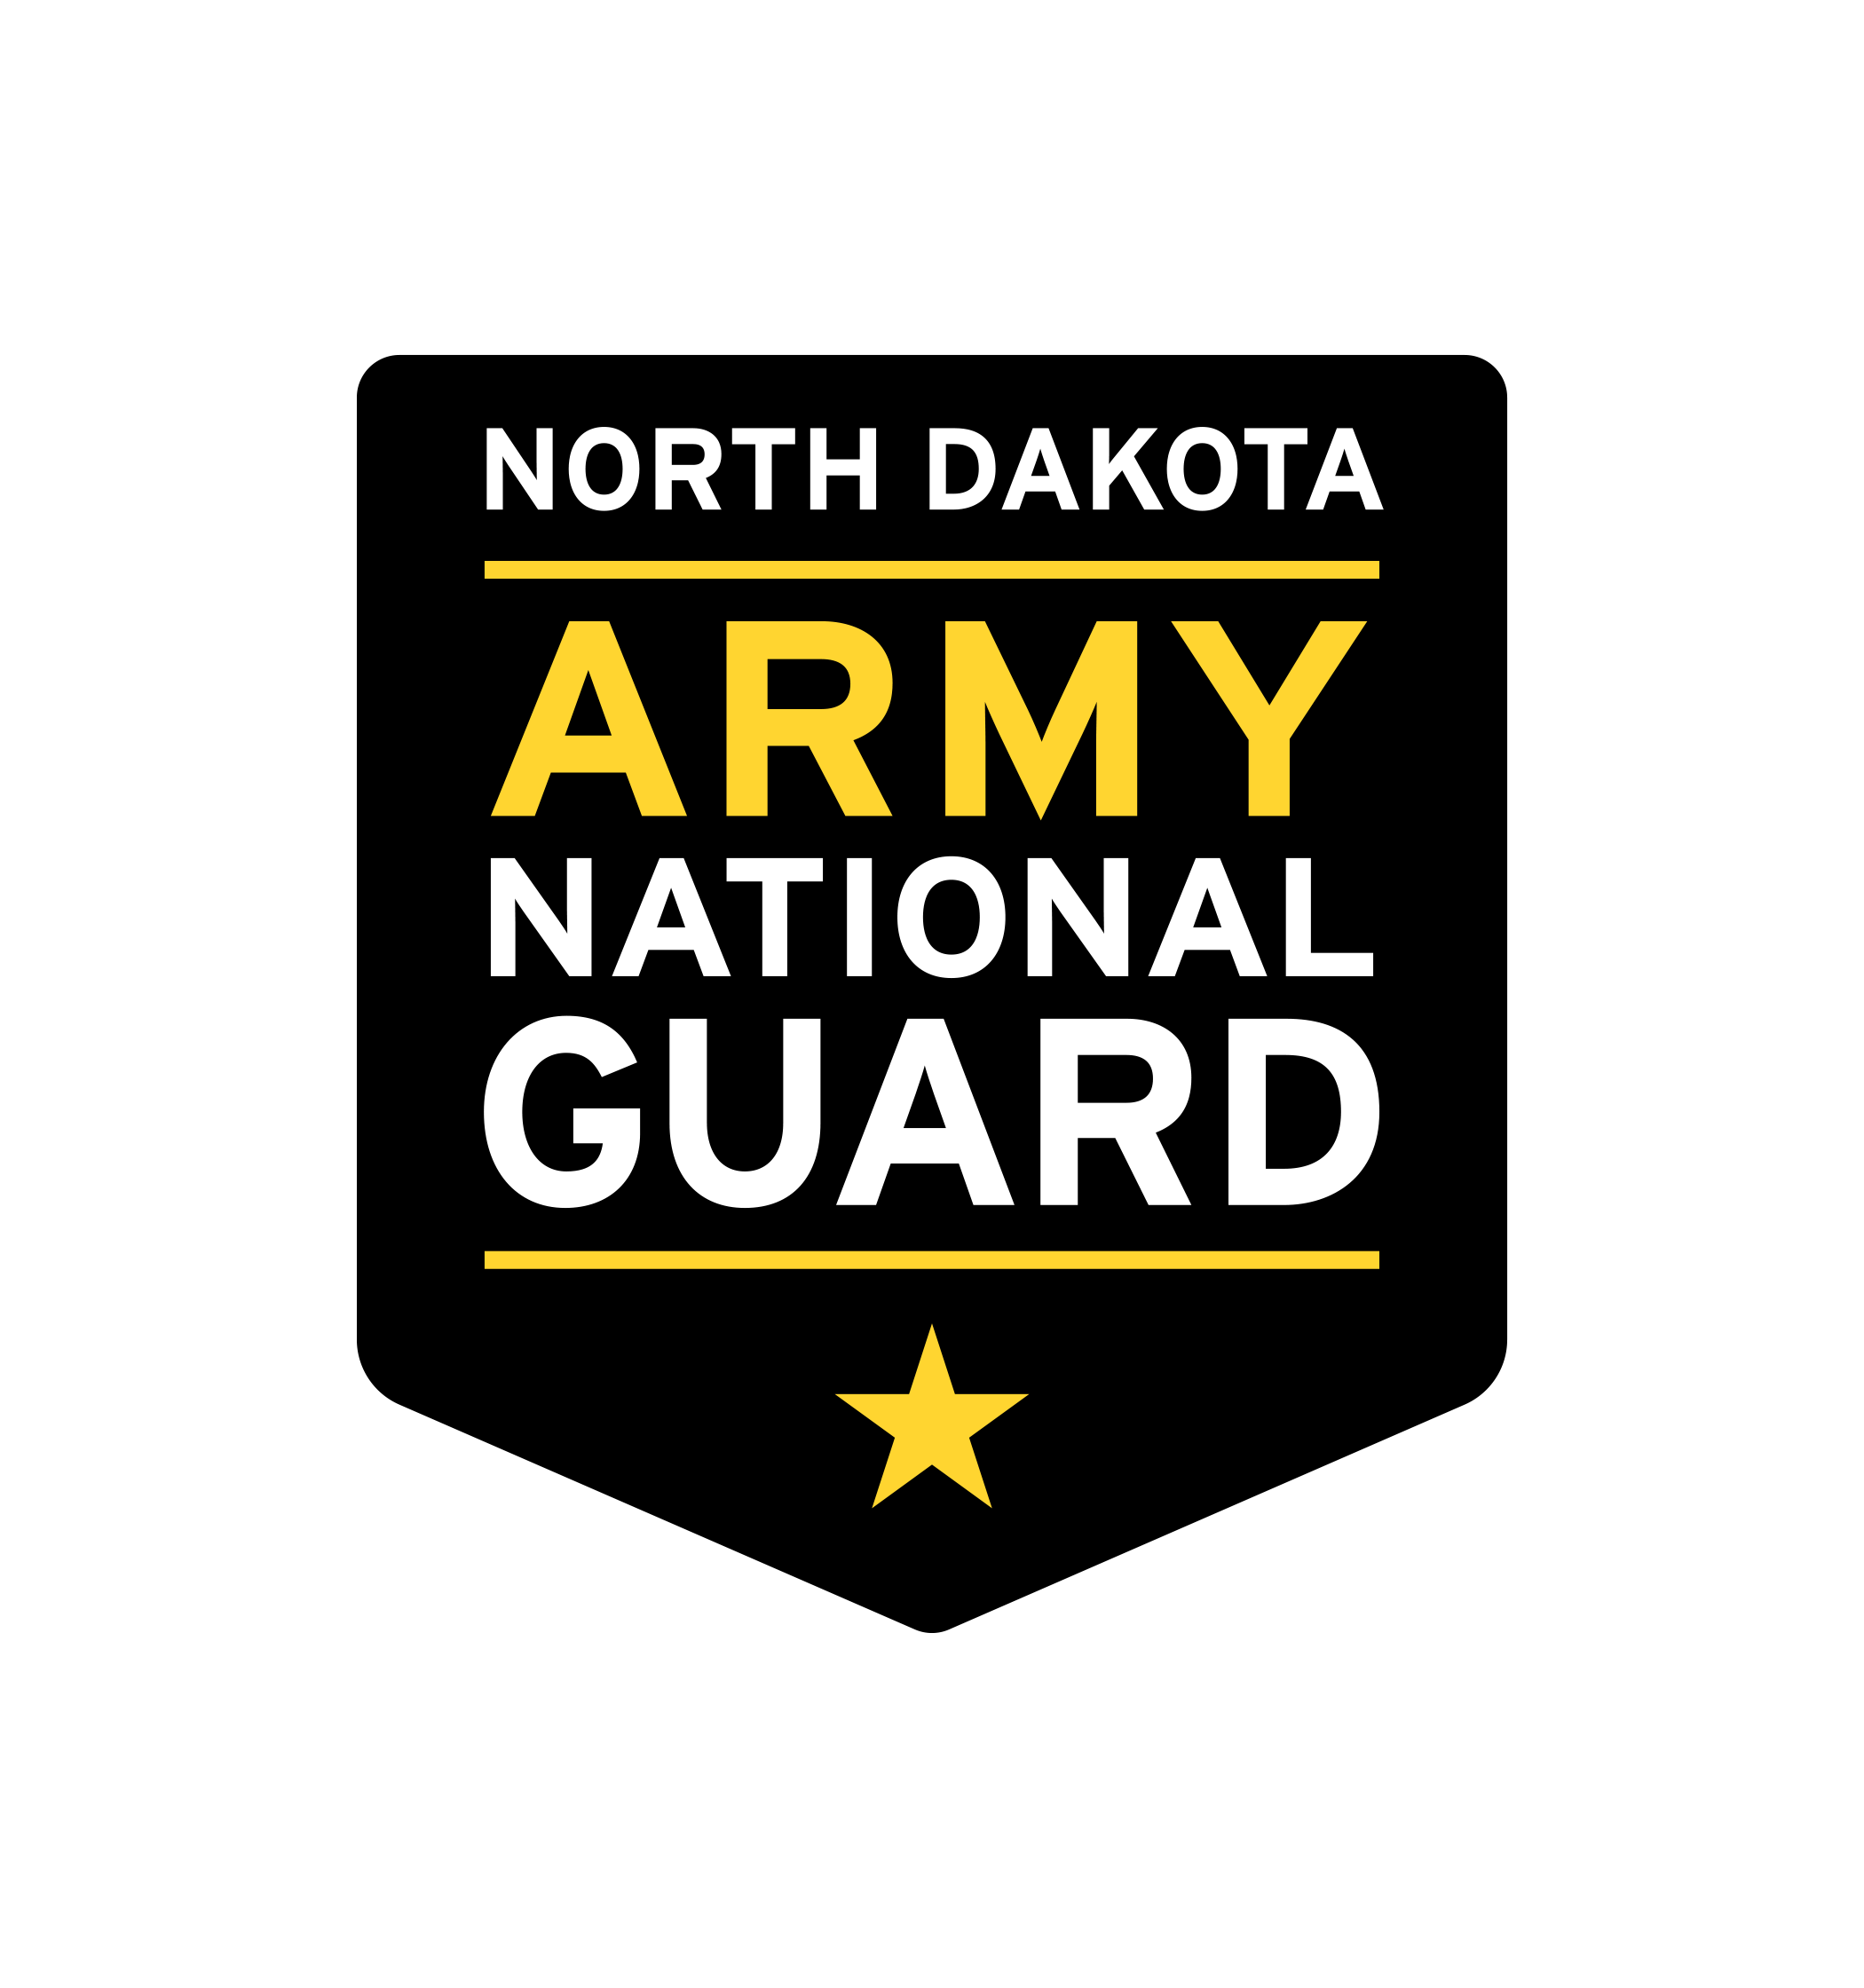 Learn more about Joining the North Dakota Army National Guard